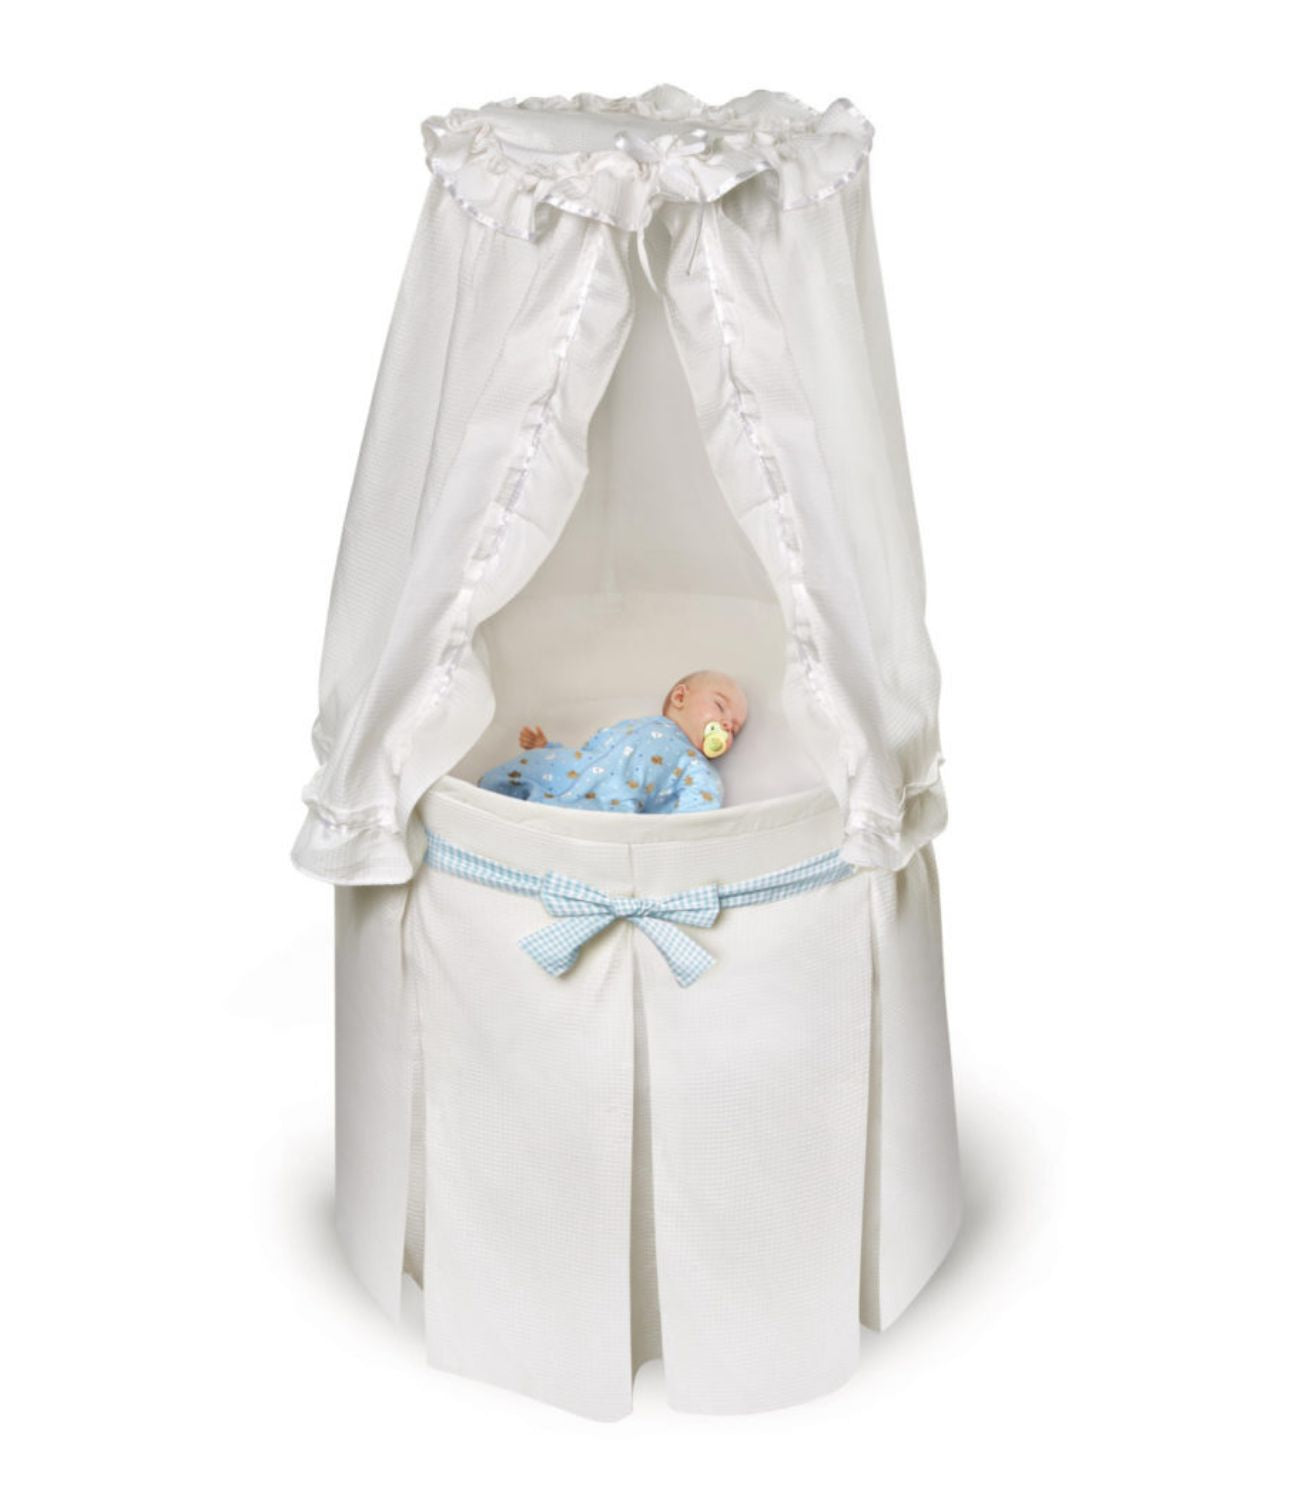 Badger Basket Empress Round Baby Bassinet with Canopy – White Bedding with Gingham Belts